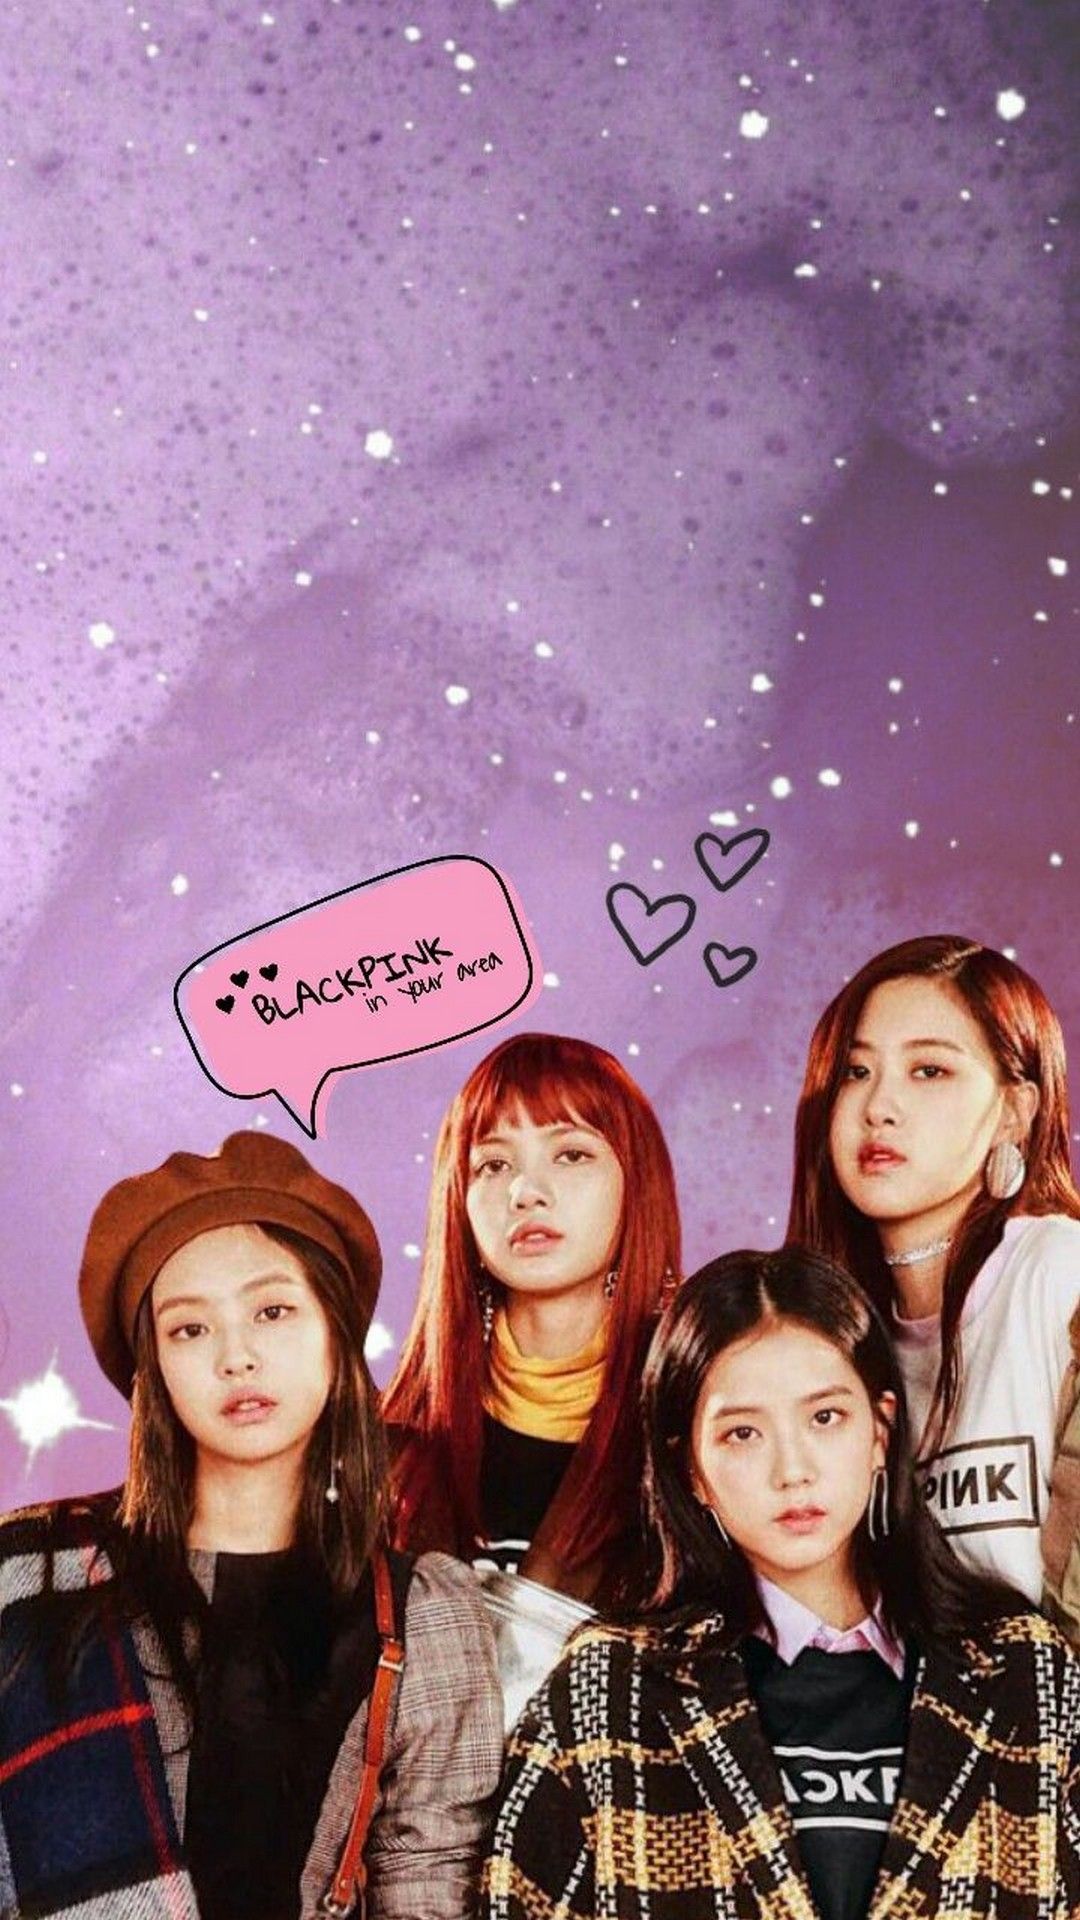 Blackpink Cell Phones Wallpaper Phone Wallpaper HD. Wallpaper blackpink, Black pink wallpaper, Pink picture